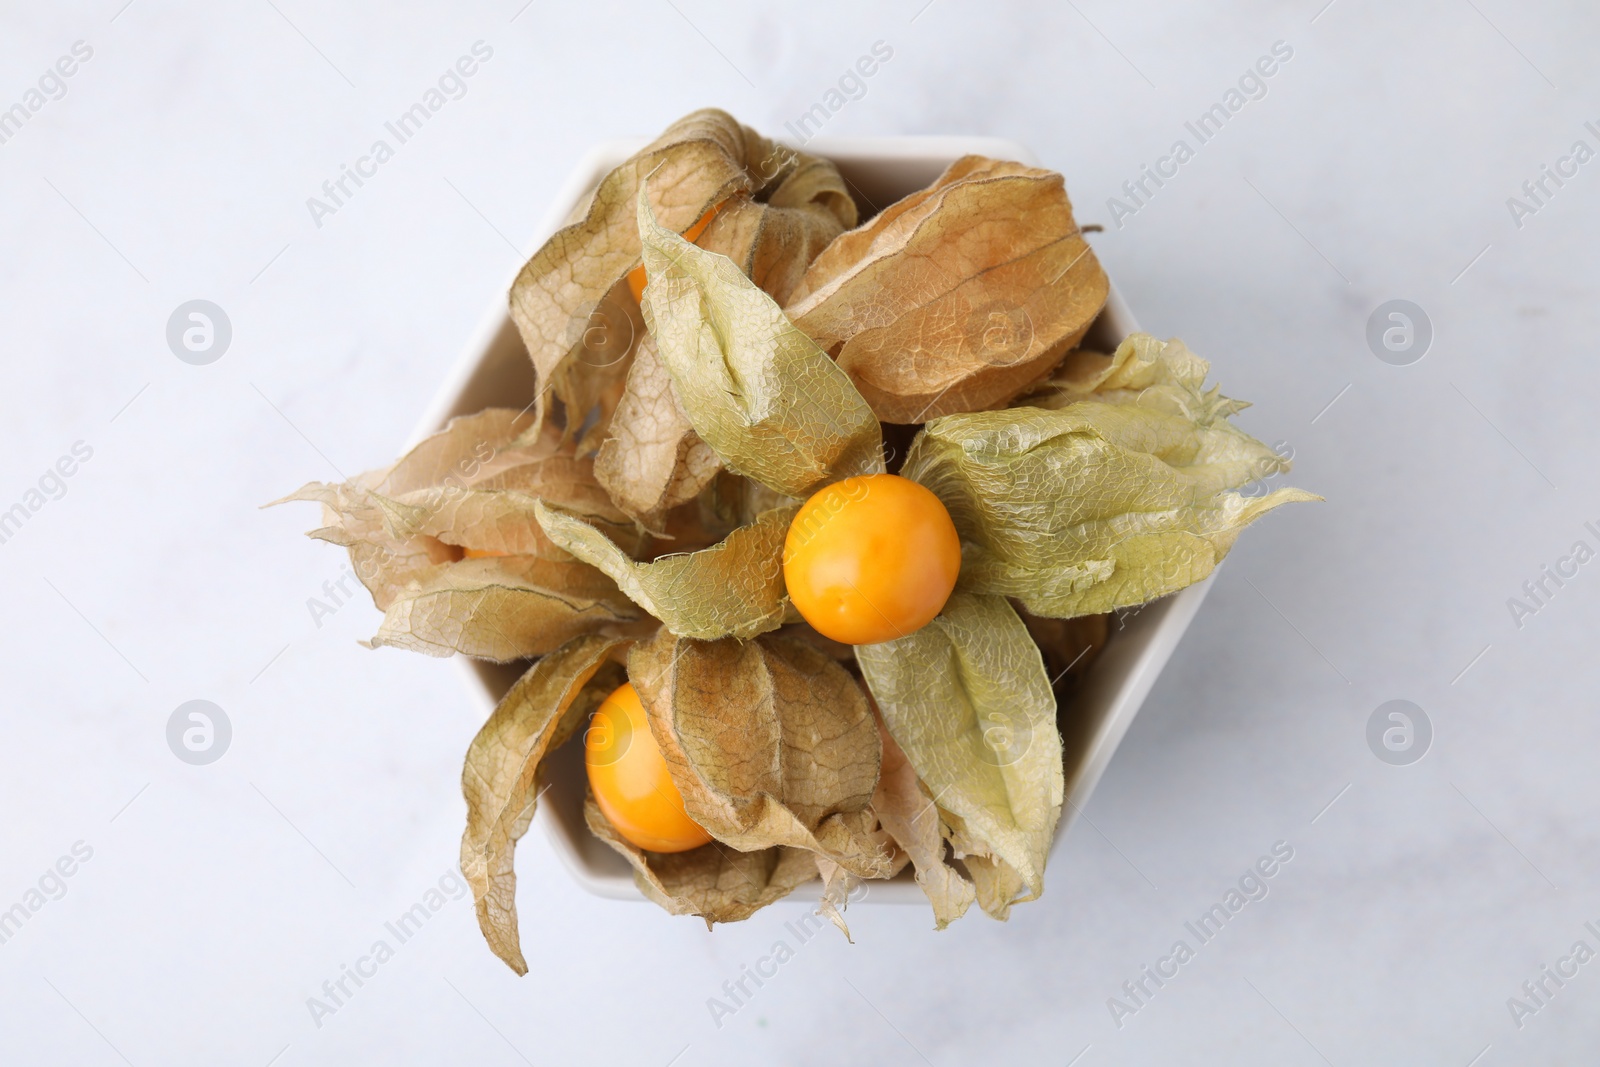 Photo of Ripe physalis fruits with calyxes in bowl on white marble table, top view